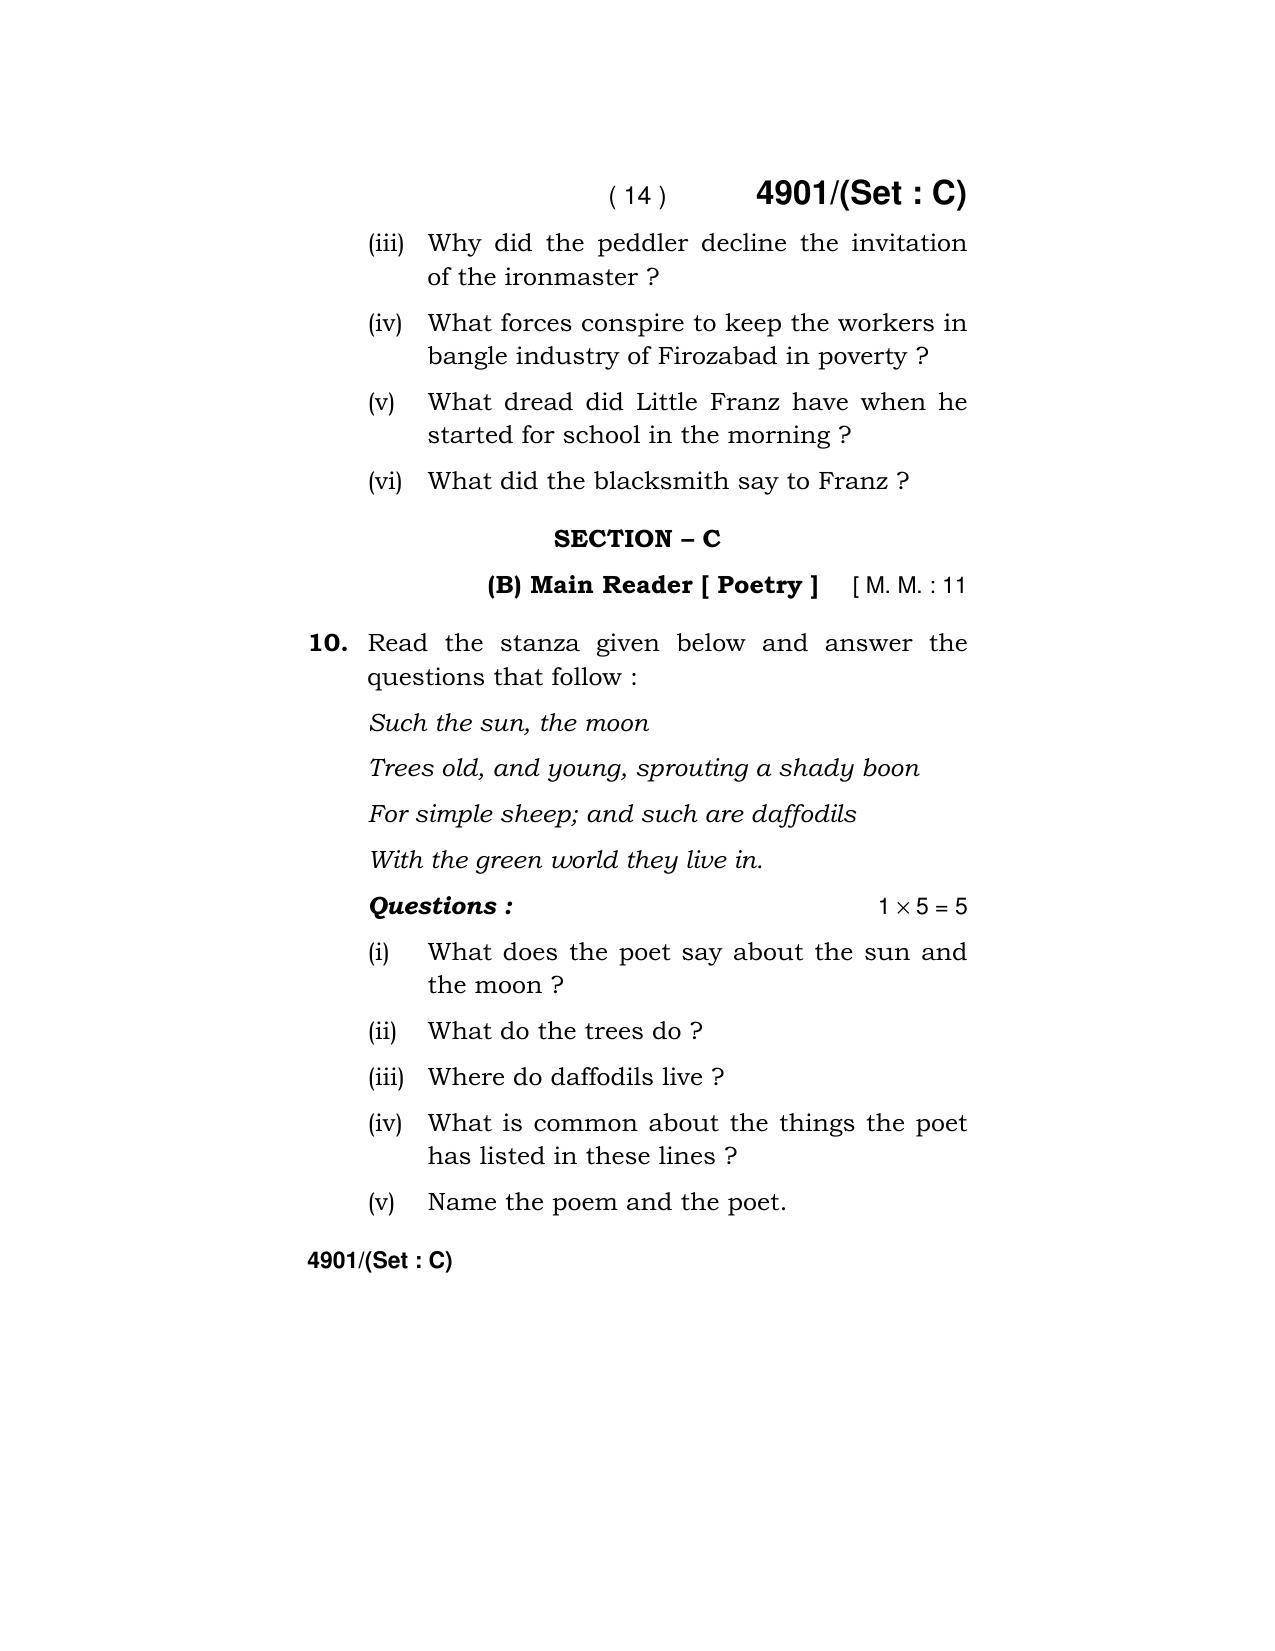 Haryana Board HBSE Class 12 English Core 2020 Question Paper - Page 46